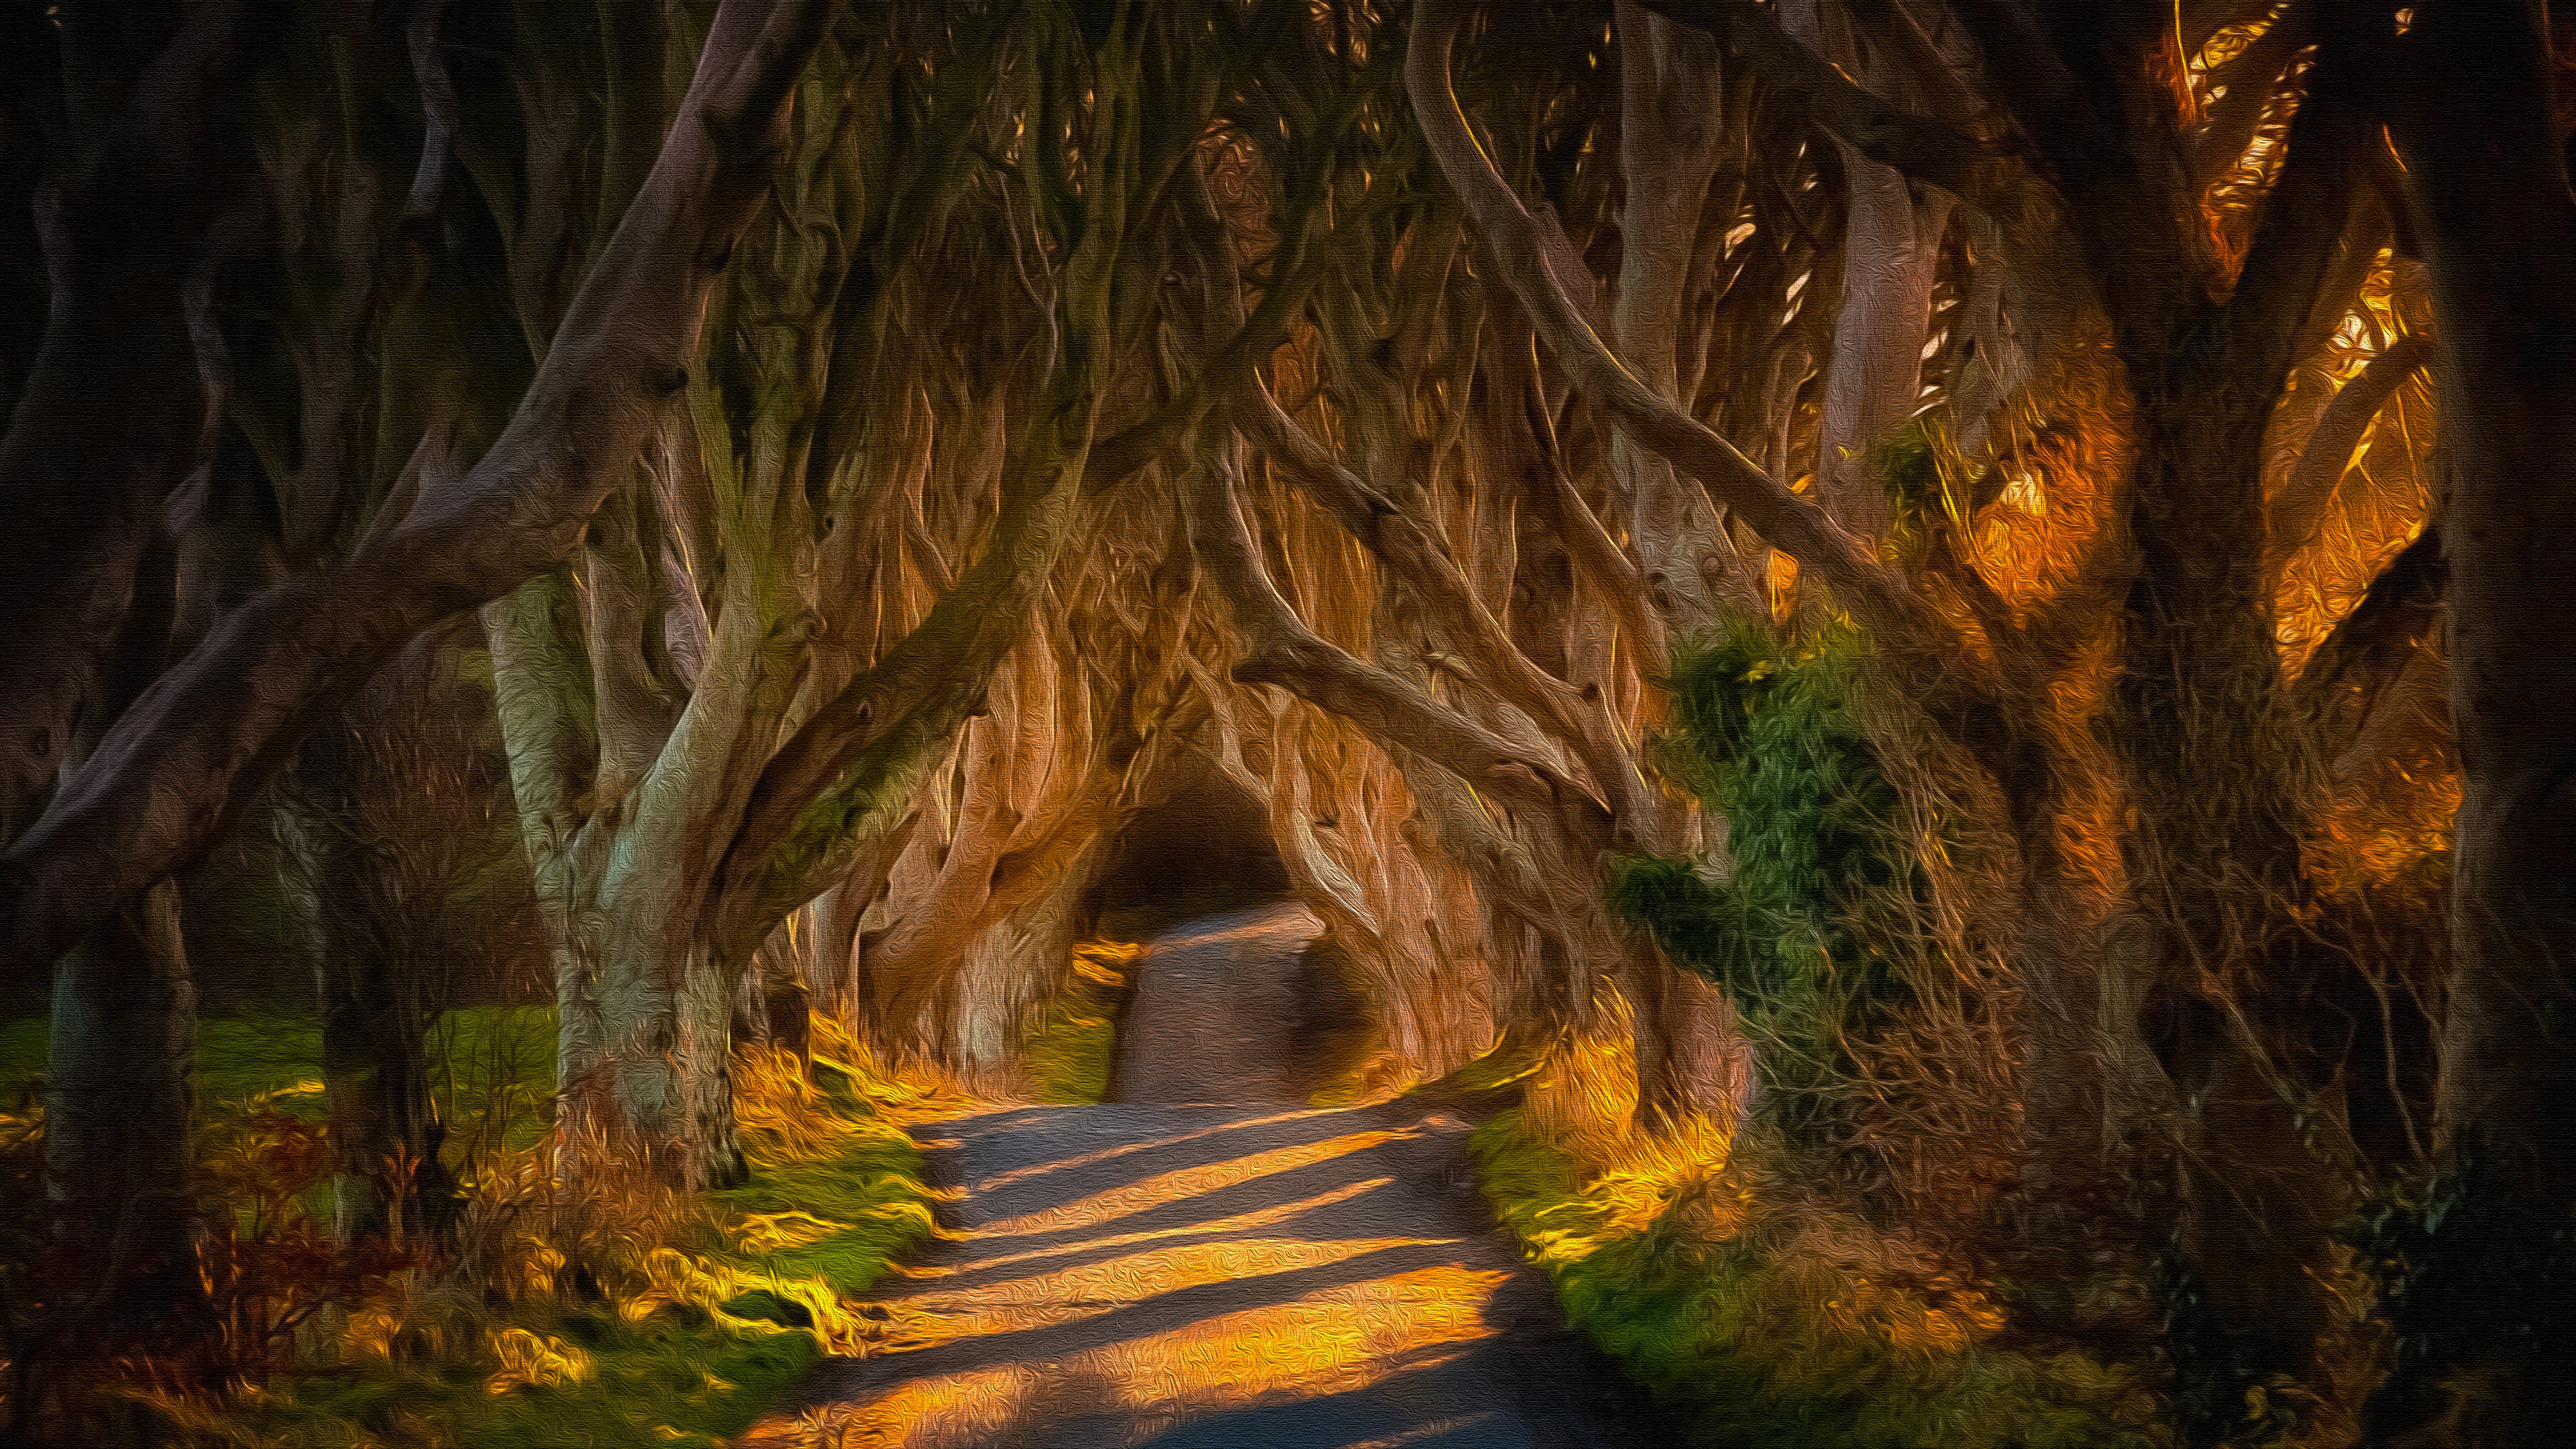 Dark Hedges County Antrim Oil On Canvas 4k Ultra Hd Wallpaper Background Image 3840x2160